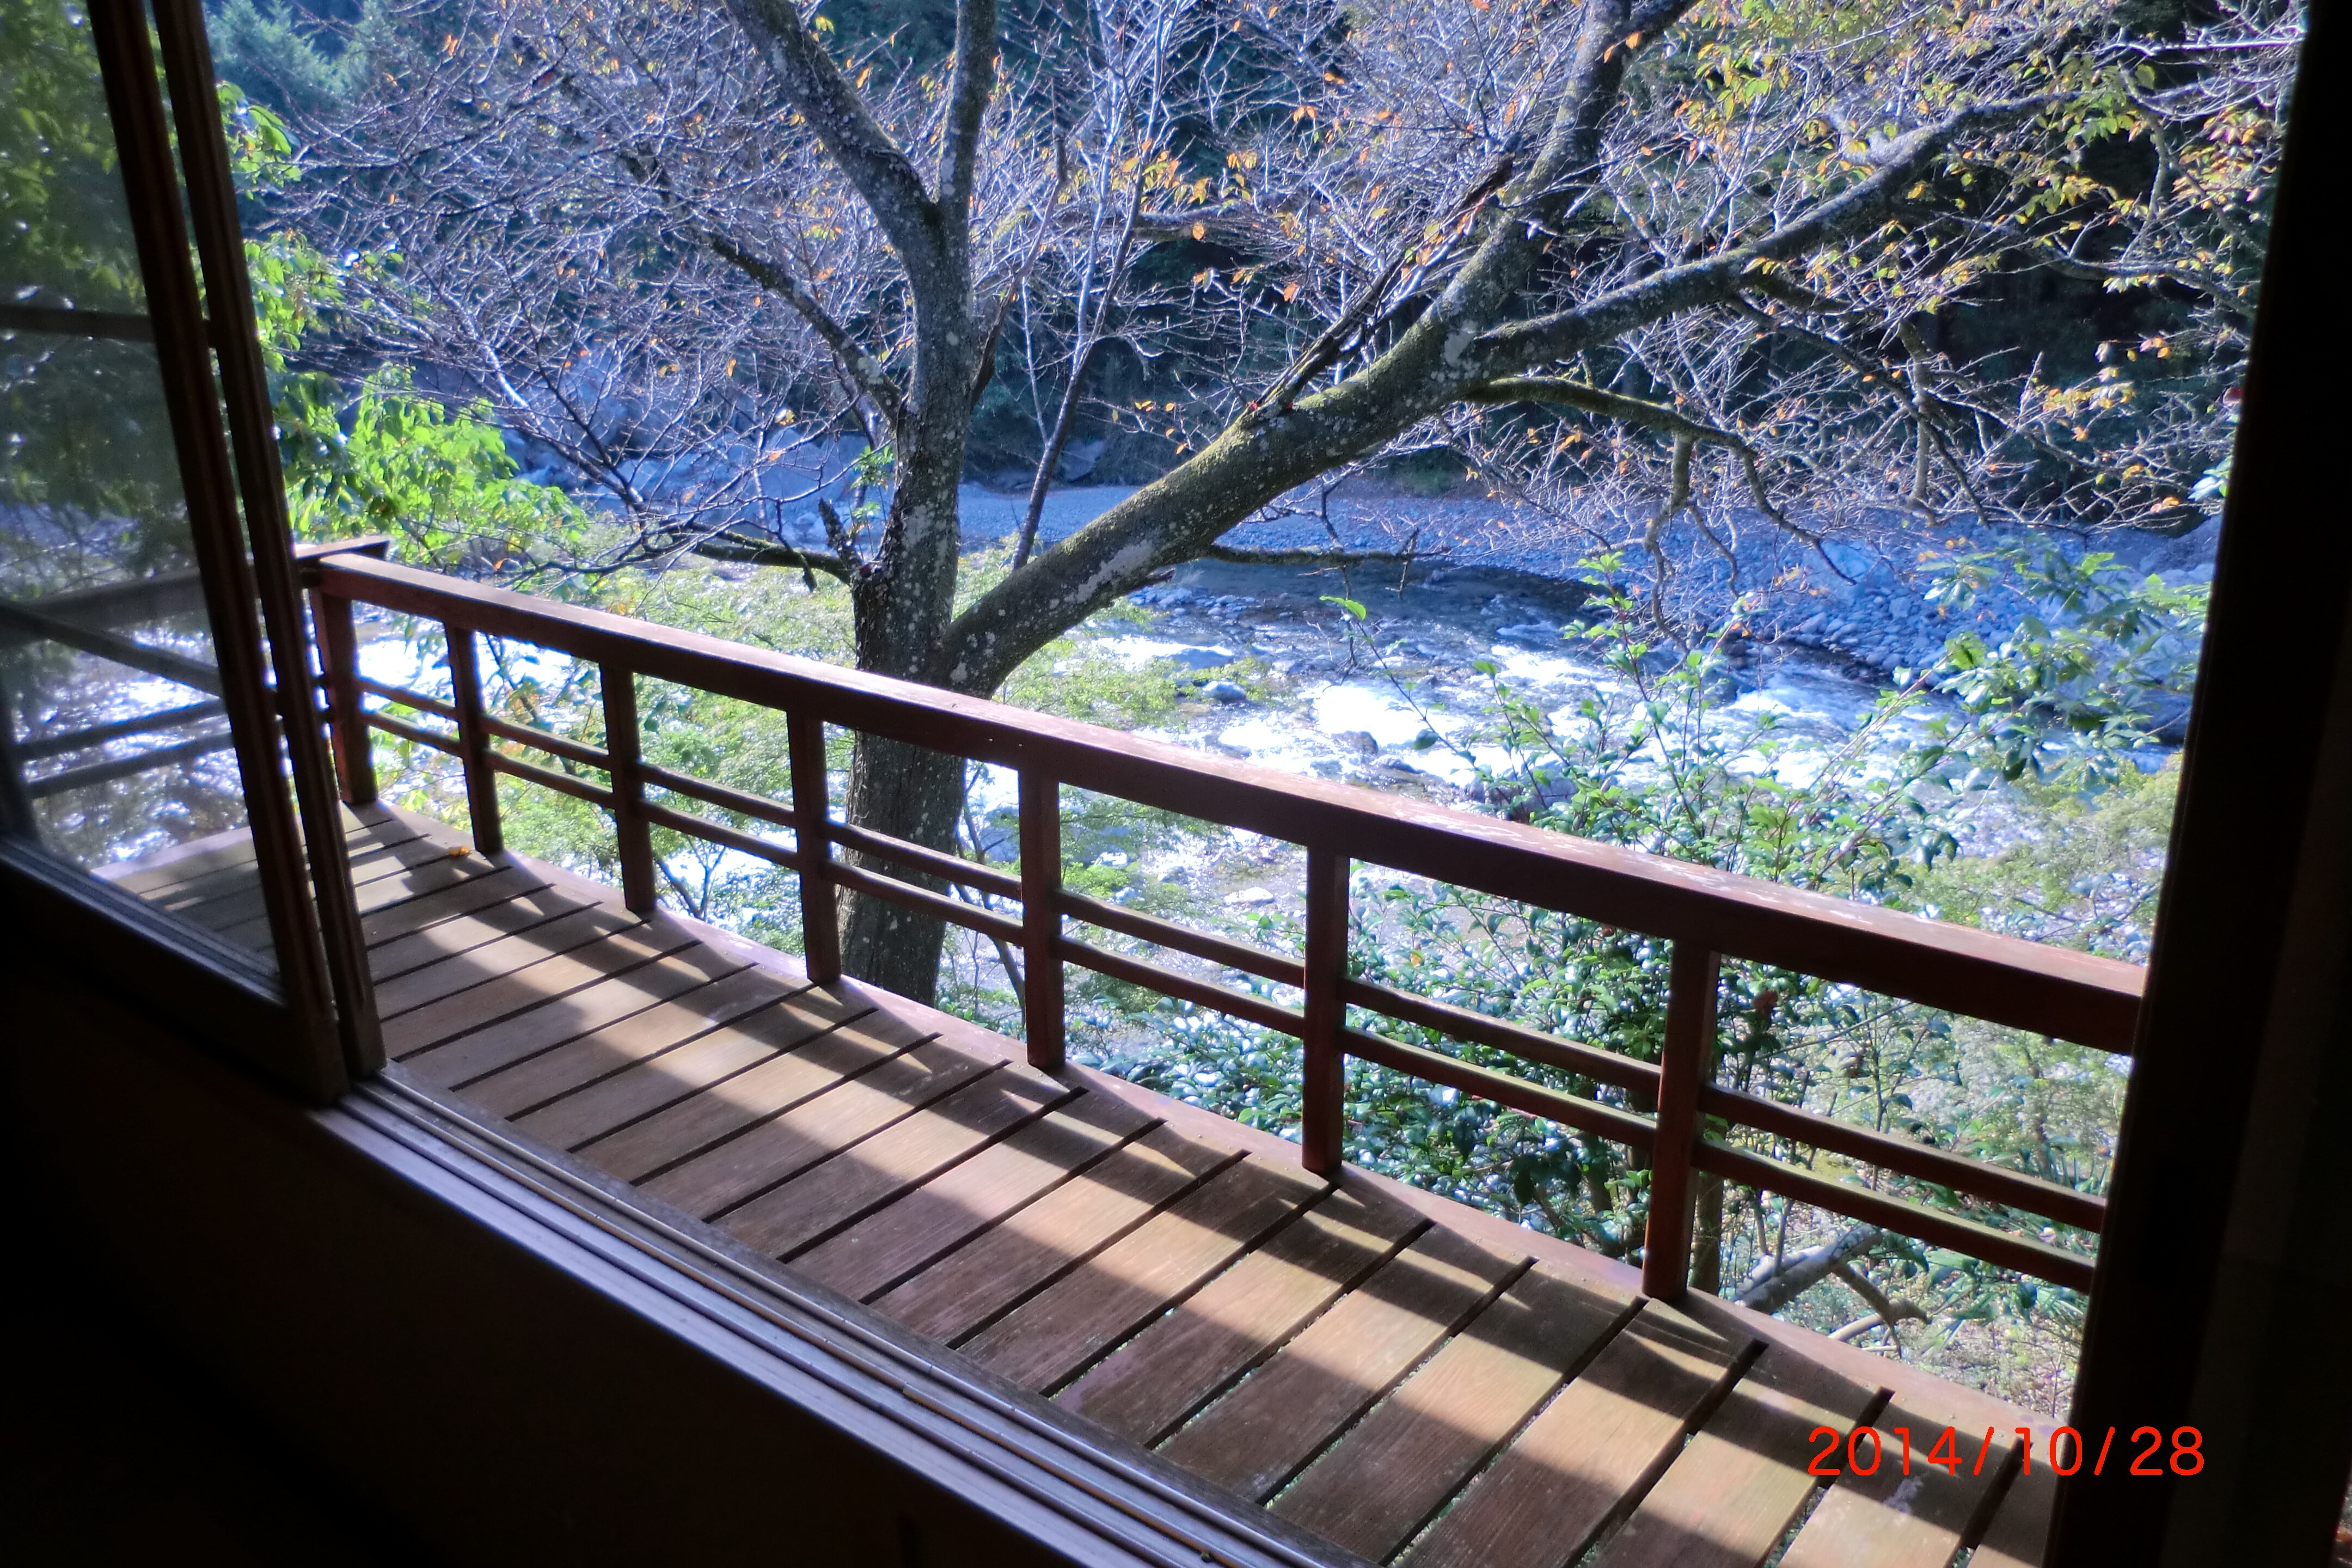 Takami River from the room